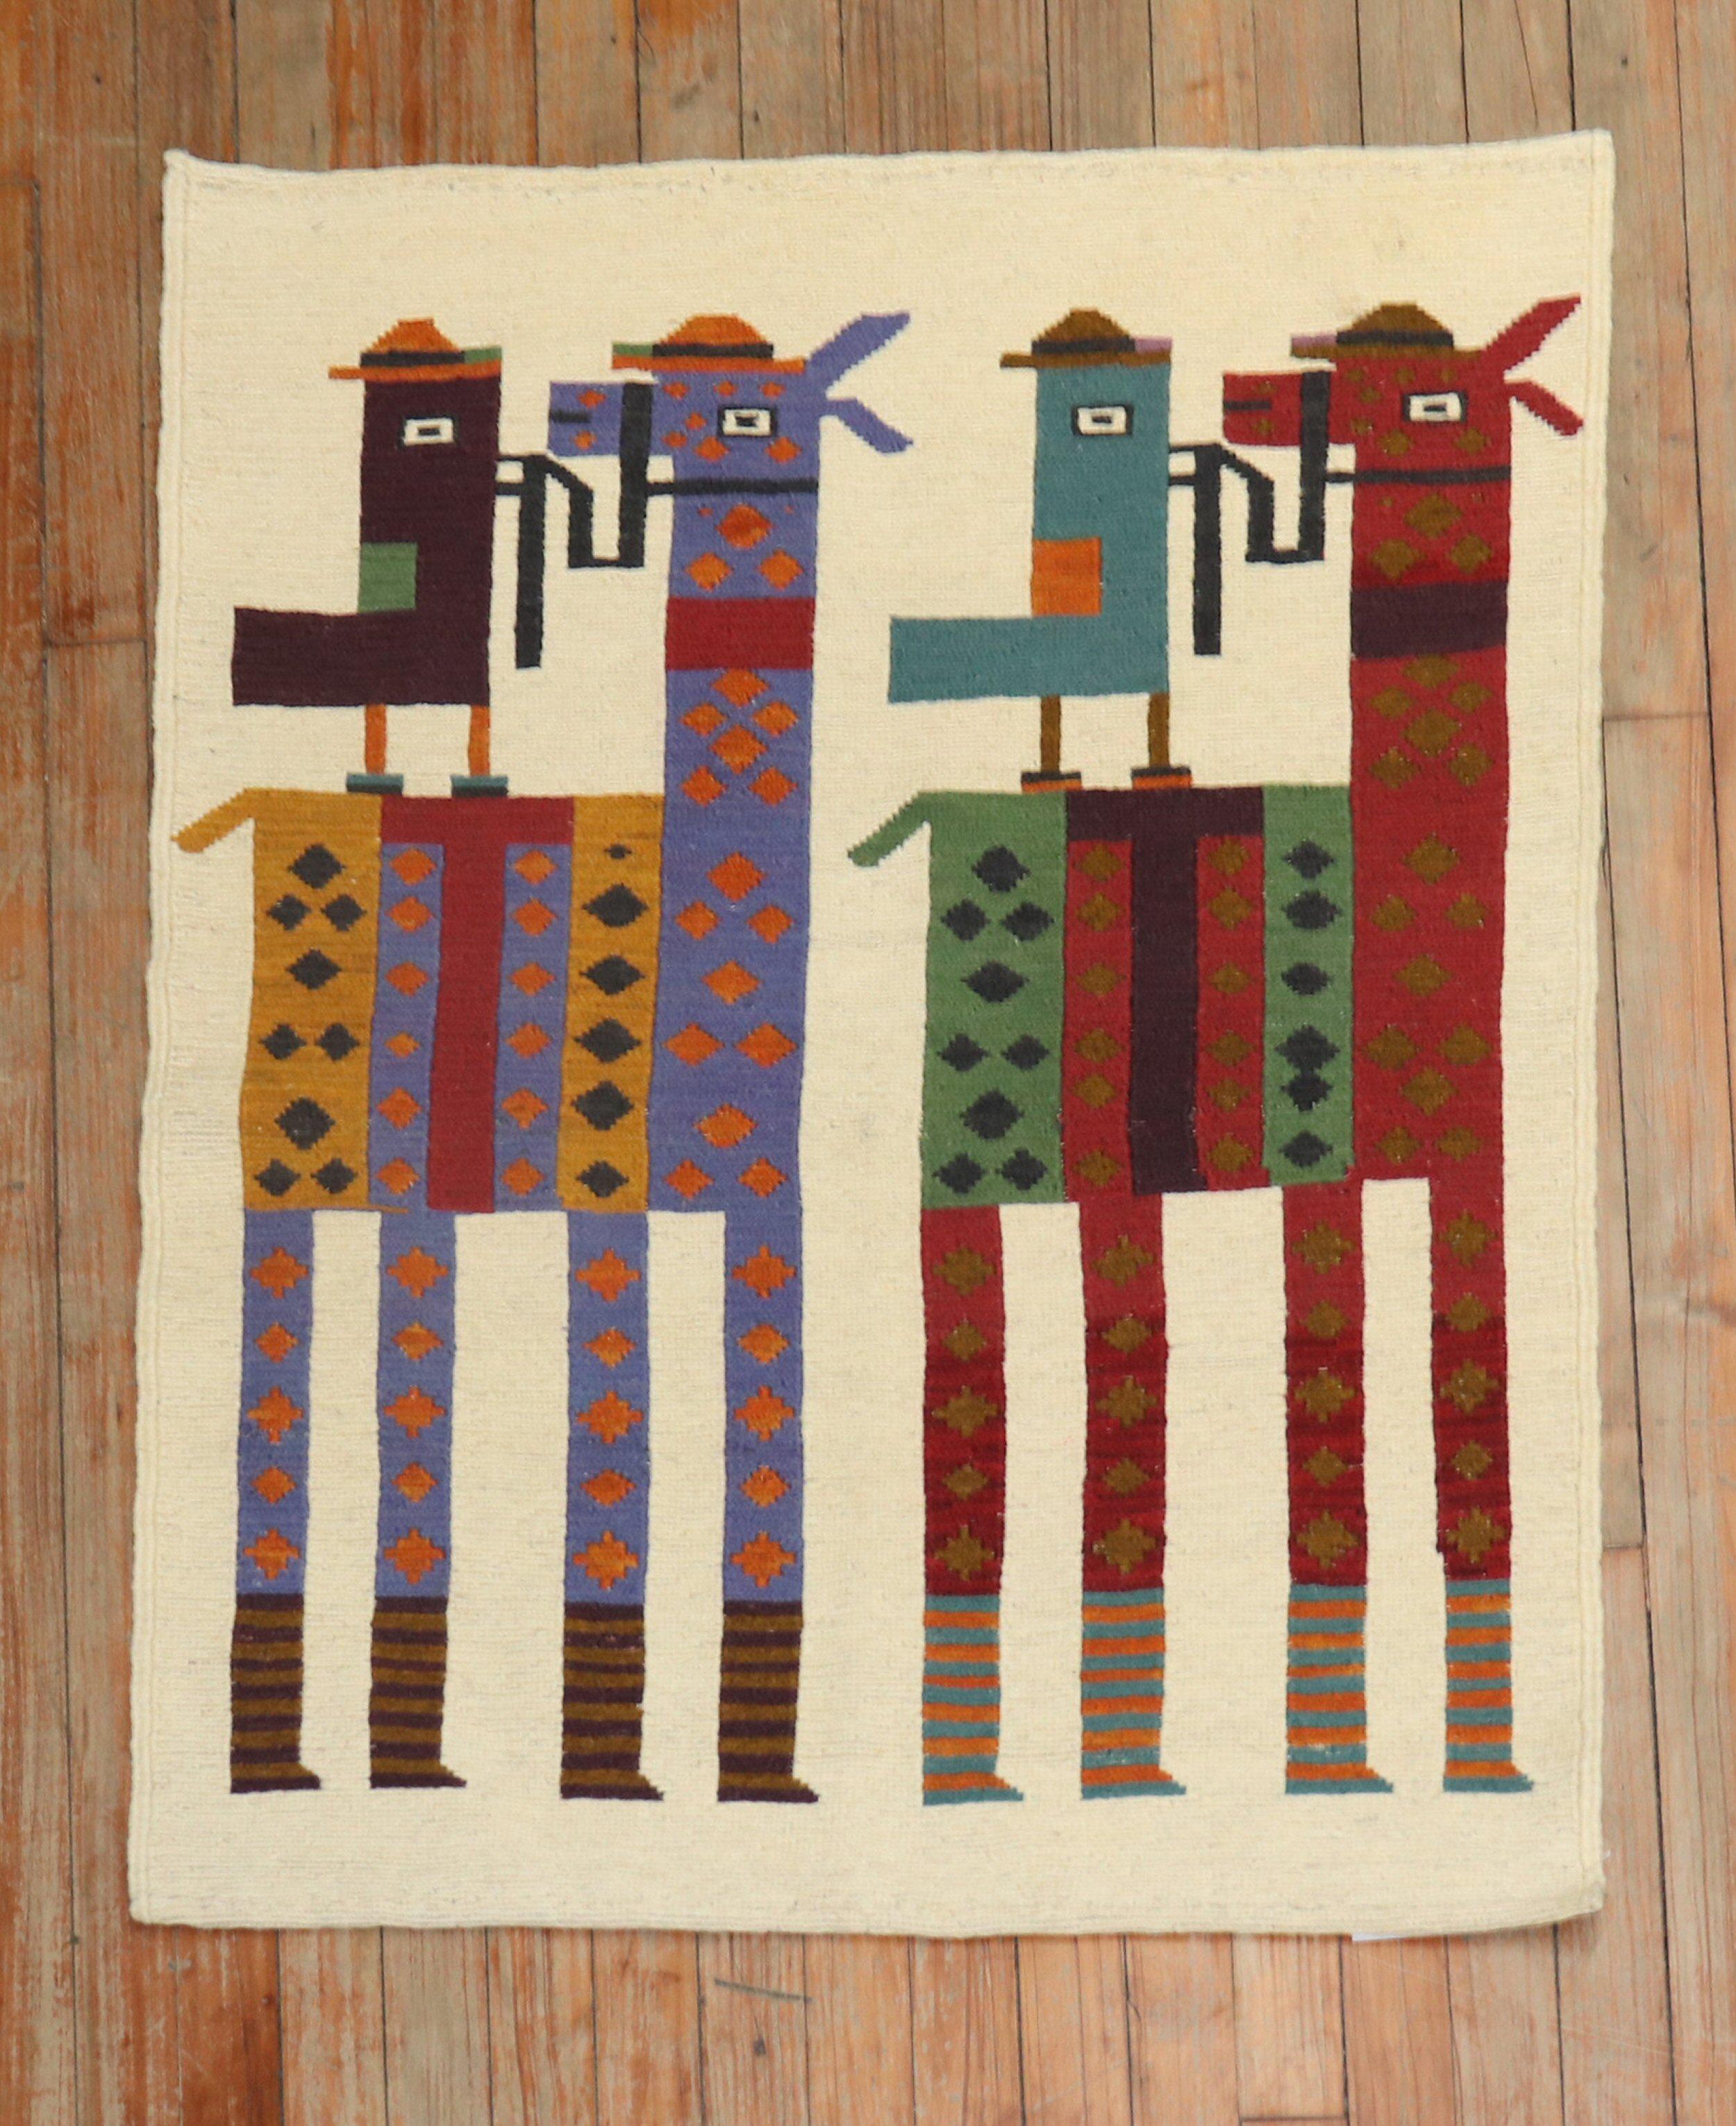 Late 20th Century Persian Kilim with 2 small birds and 2 mini horses

Measures: 2'8'' x 3'5''

This was originally belonging to a private Persian collector who requested to make a custom collection of flat-weaves with quirky themes and